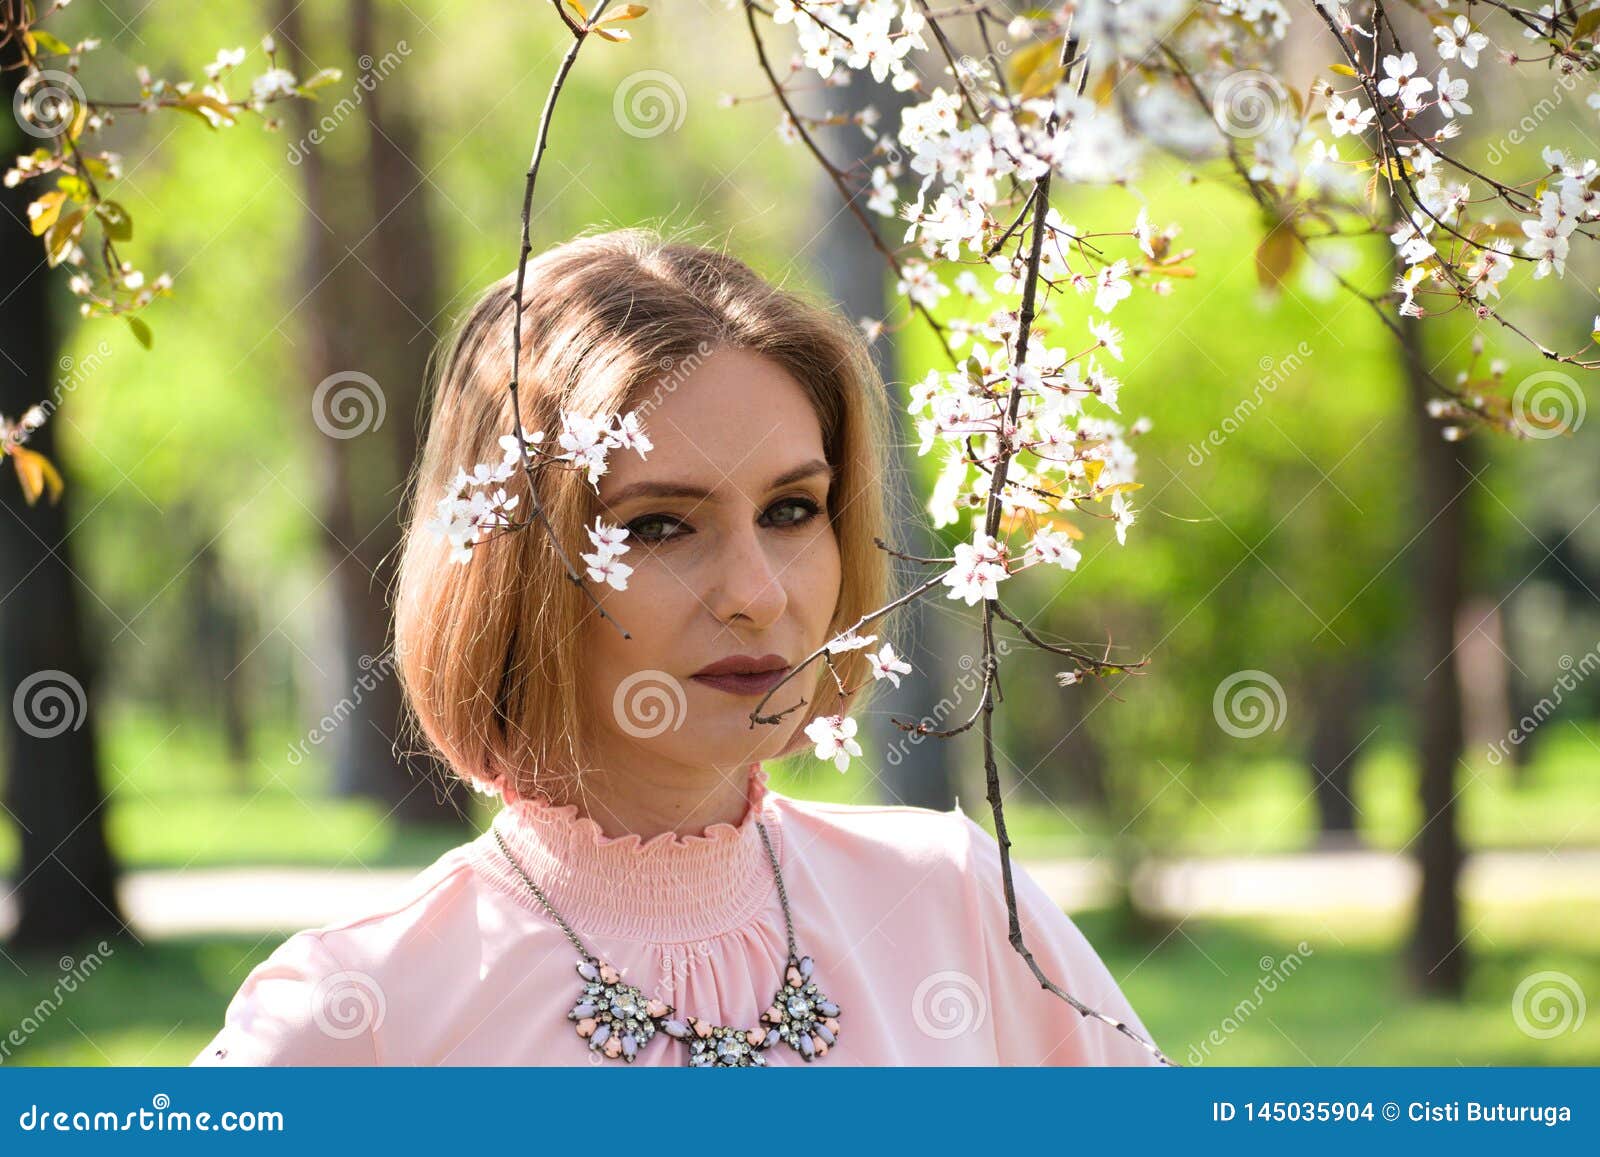 Pretty Blonde Girl In A Park Stock Photo Image Of Trees Girl 145035904